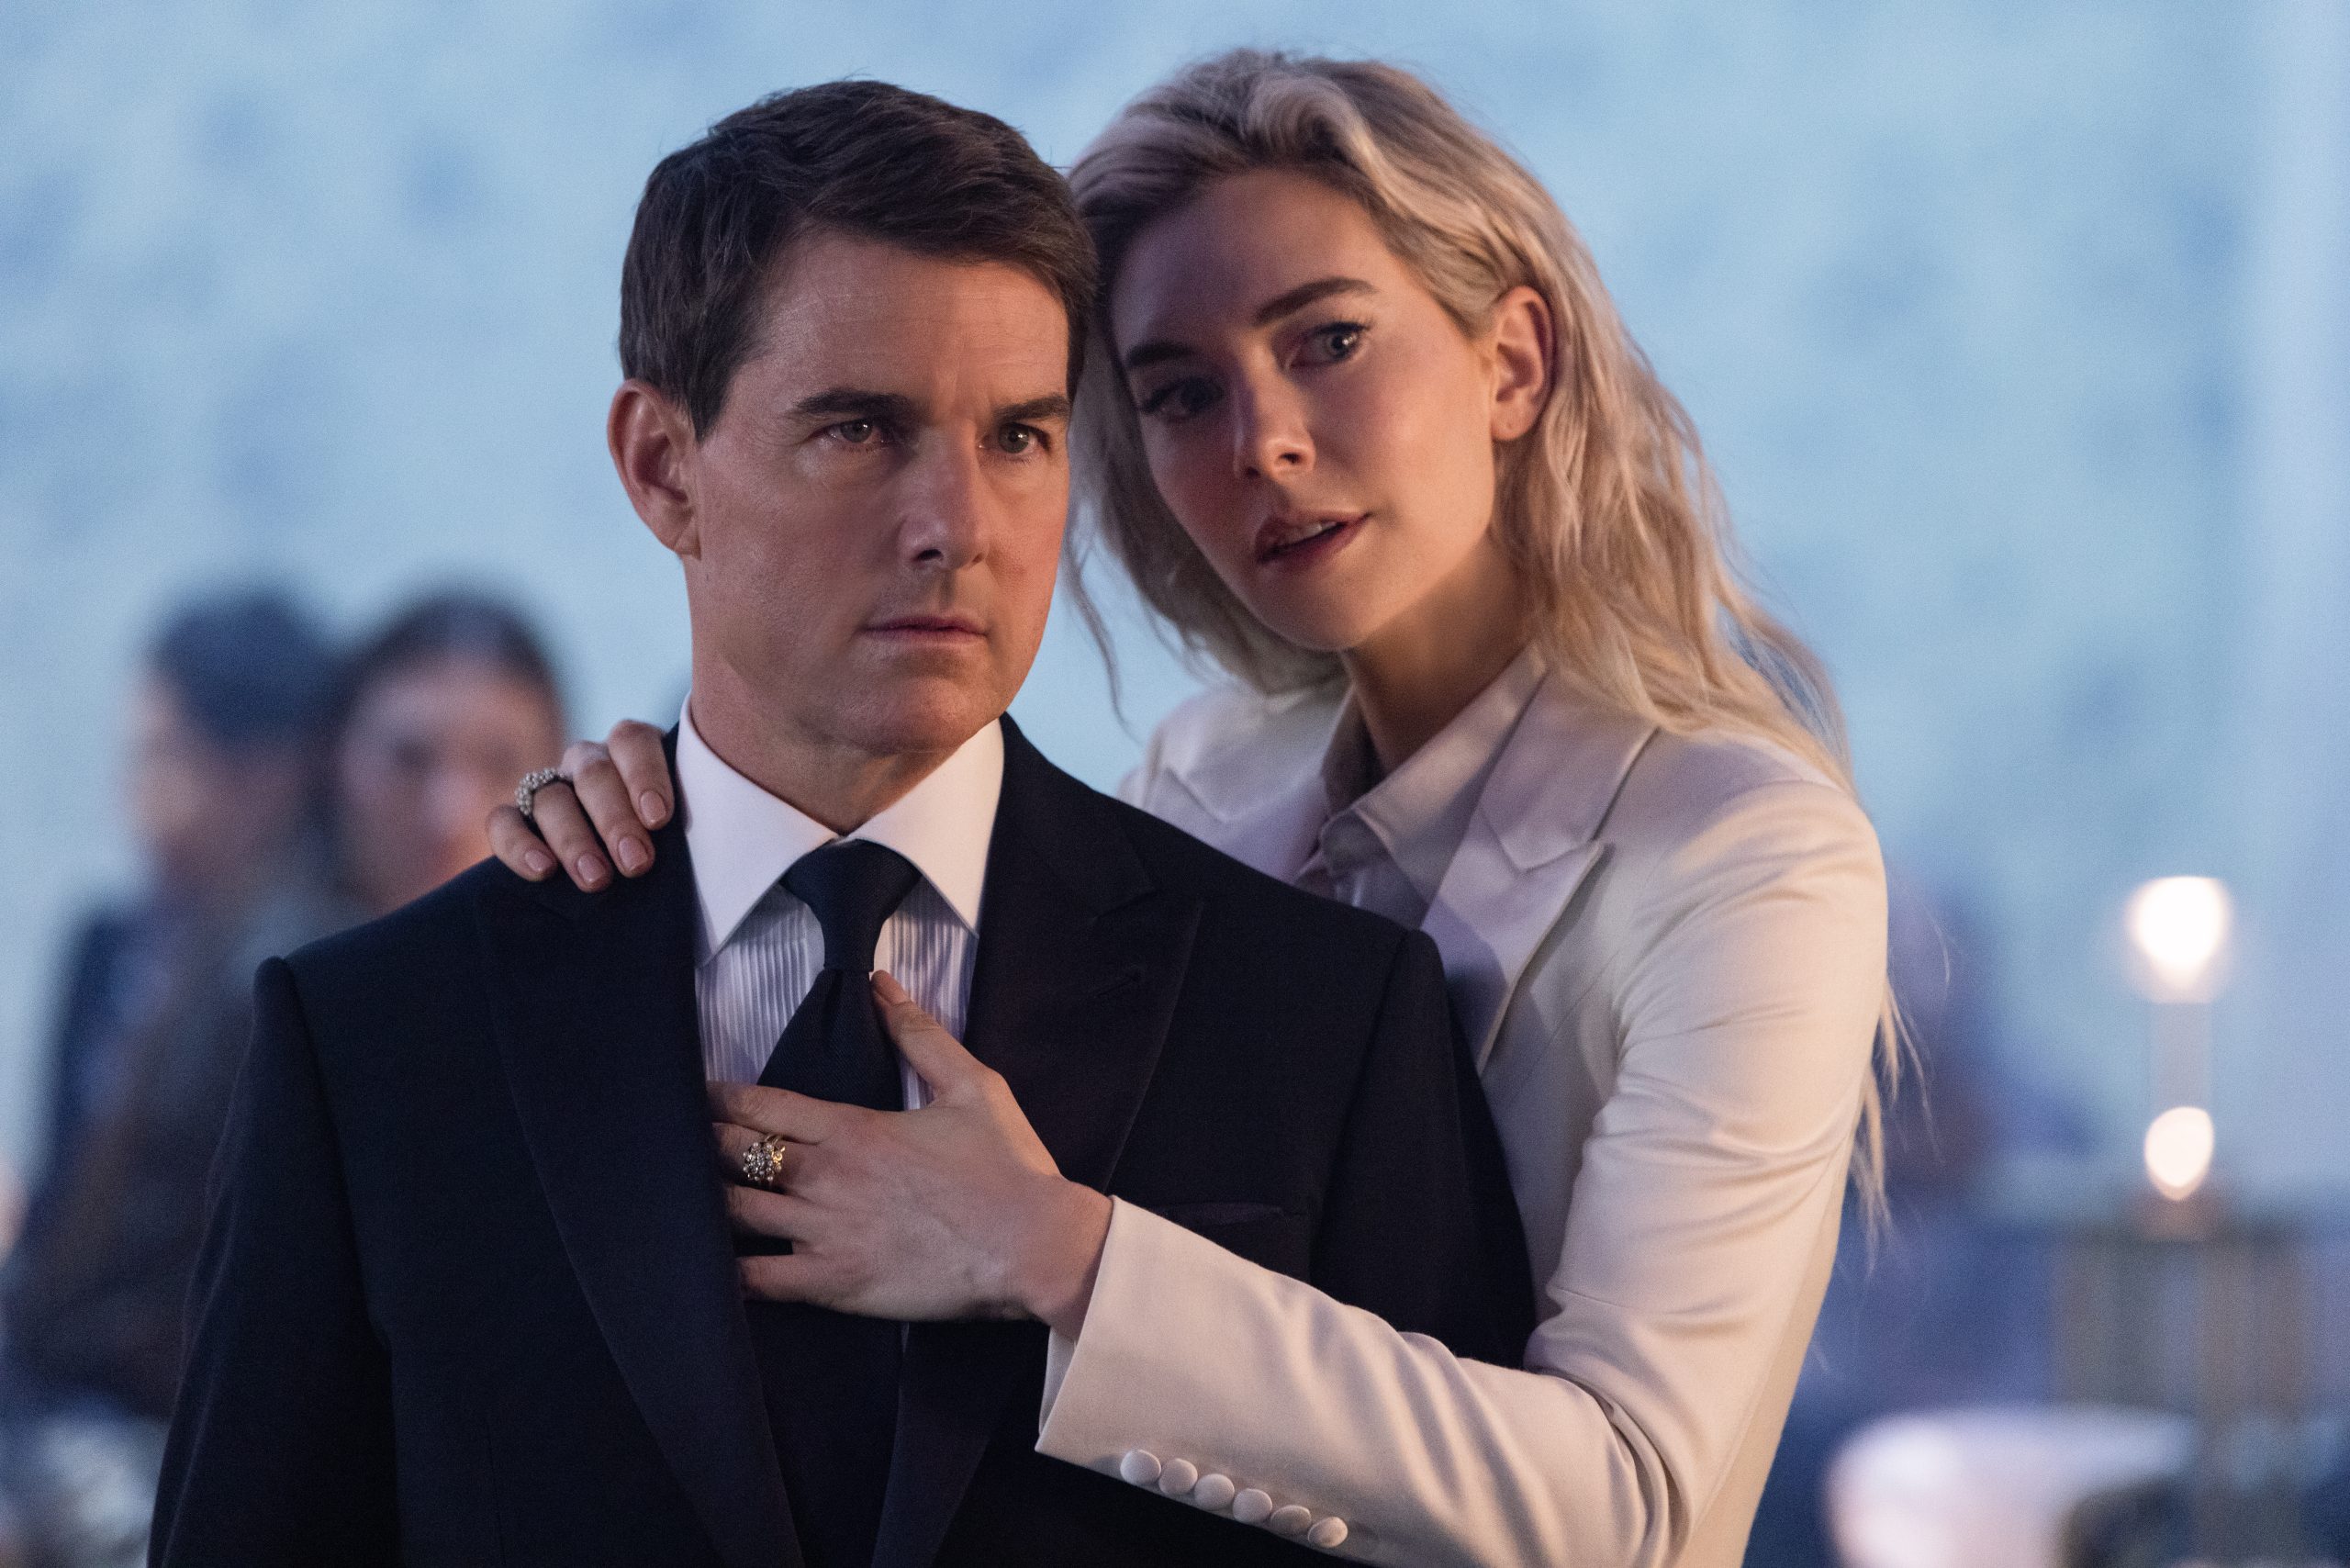 HD desktop wallpaper featuring a key moment from Mission: Impossible - Dead Reckoning Part One with the character Ethan Hunt played by the actor associated with the character, standing close with a female character in an intense scene.